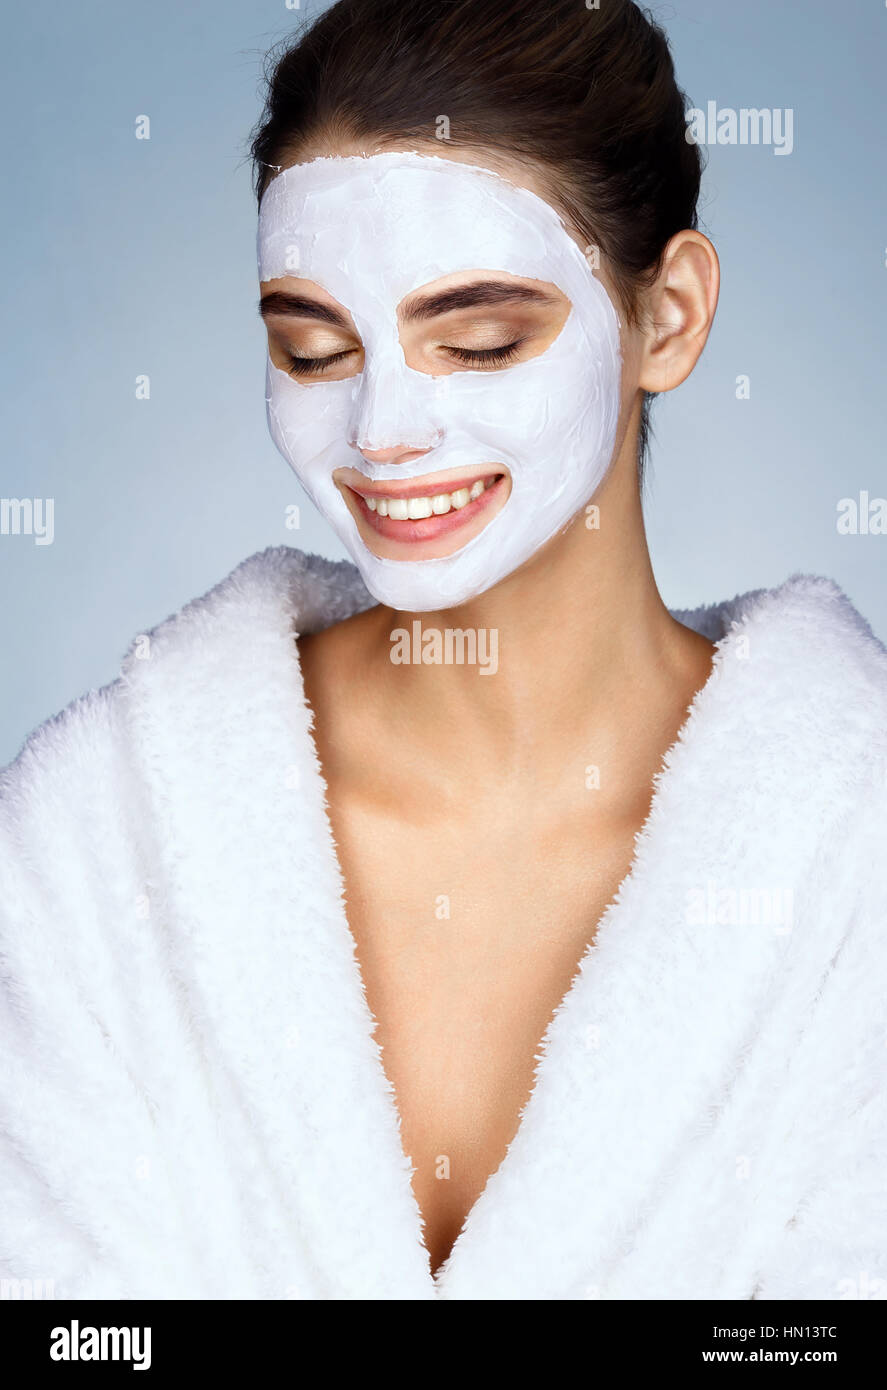 Laughing girl with moisturizing facial mask. Happy young woman smiling while wearing a face mask. Beauty & Skin care concept Stock Photo